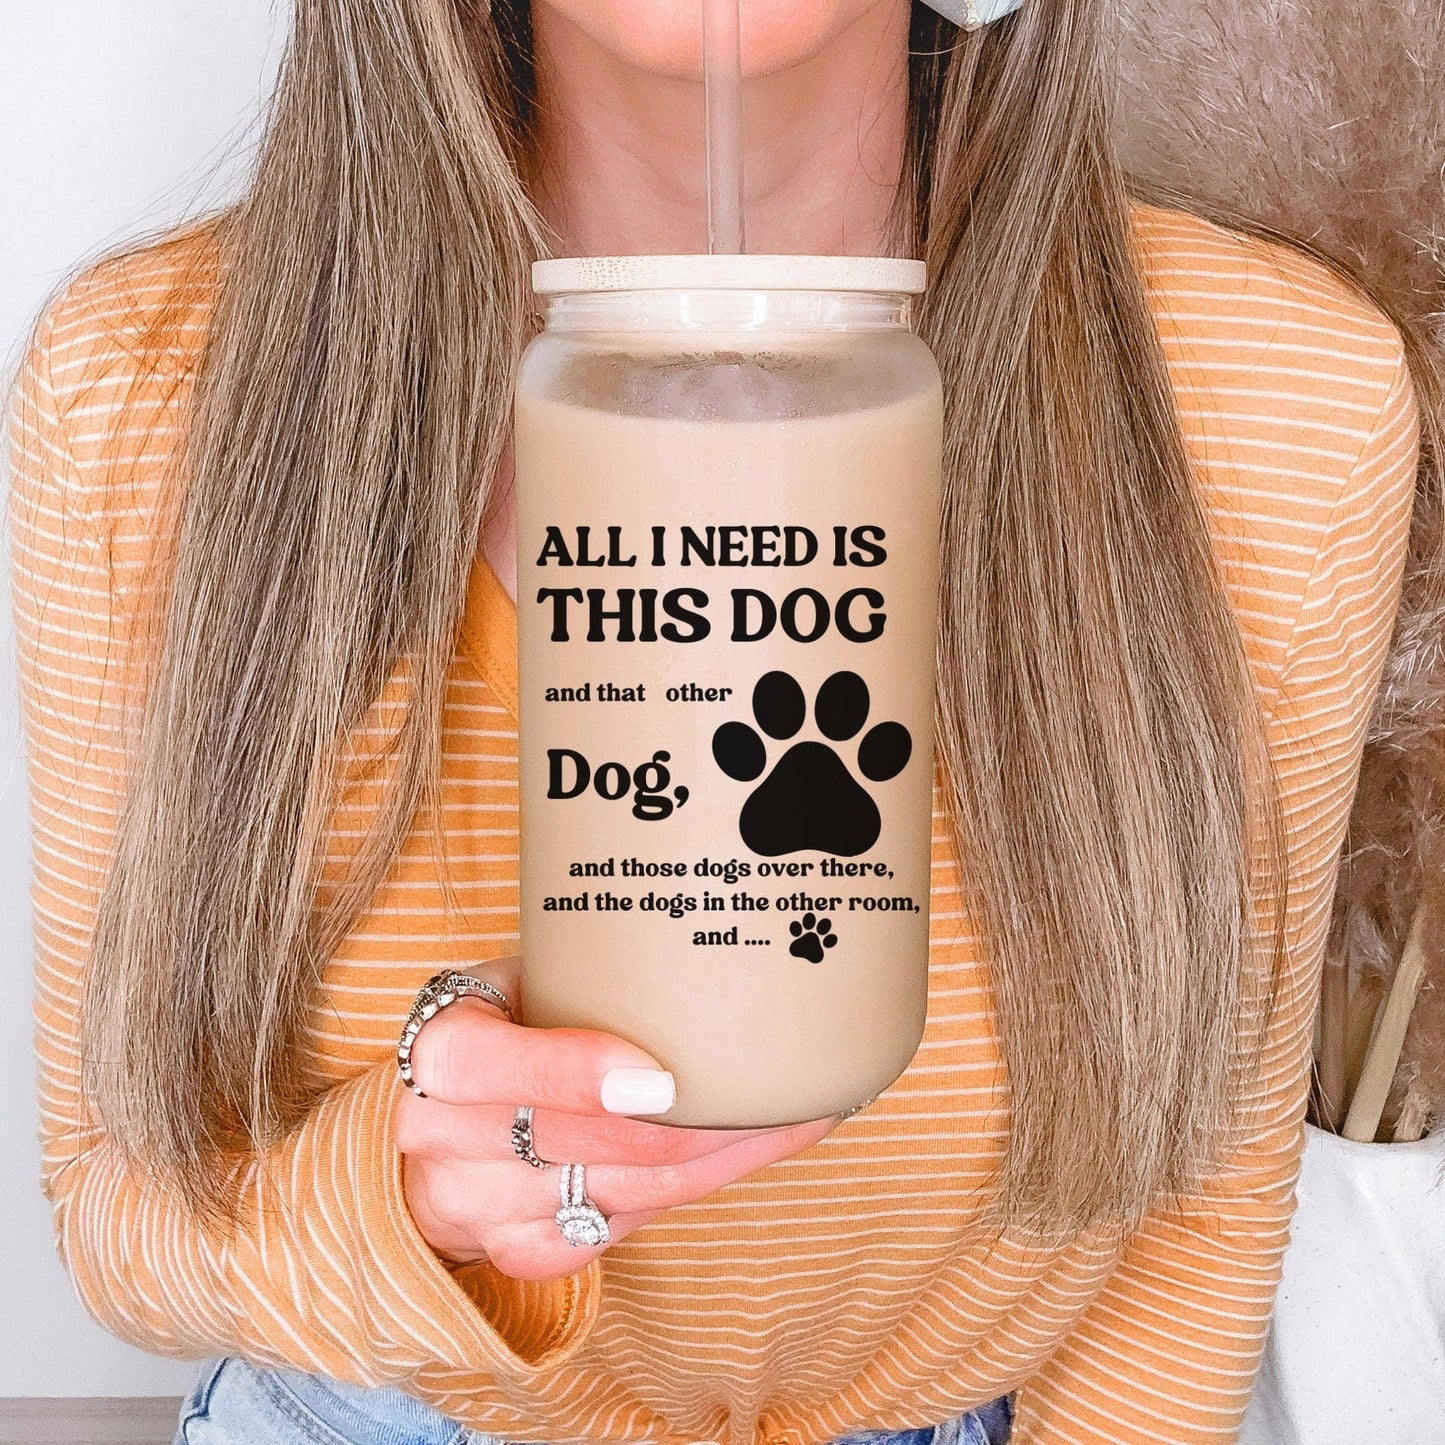 Dog Mom Iced Coffee Cup Dog Mama Frosted Tumblers Dog Lover Gift Fur Mama gift Tumbler & straw Pet Lover Gift for Dog Mom Beer Glass Can